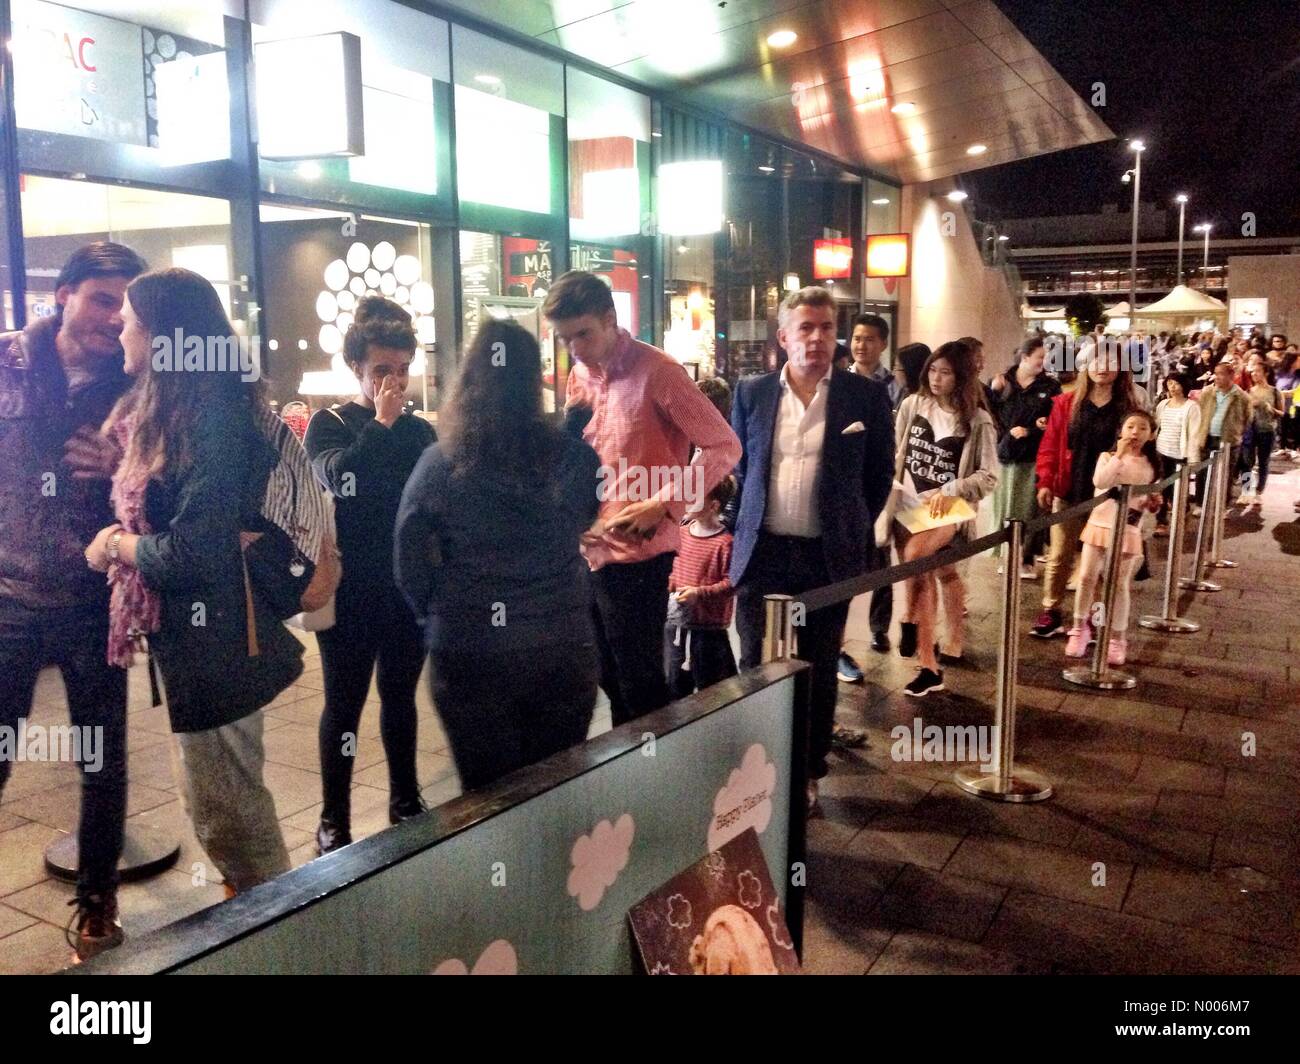 Victoria Ave, Chatswood NSW, Australia. 12th Apr, 2016. Crowds in Chatswood, Sydney lineup for the Ben and Jerry's Free Cone Day promotional event. Credit:  mjmediabox/StockimoNews/Alamy Live News Stock Photo